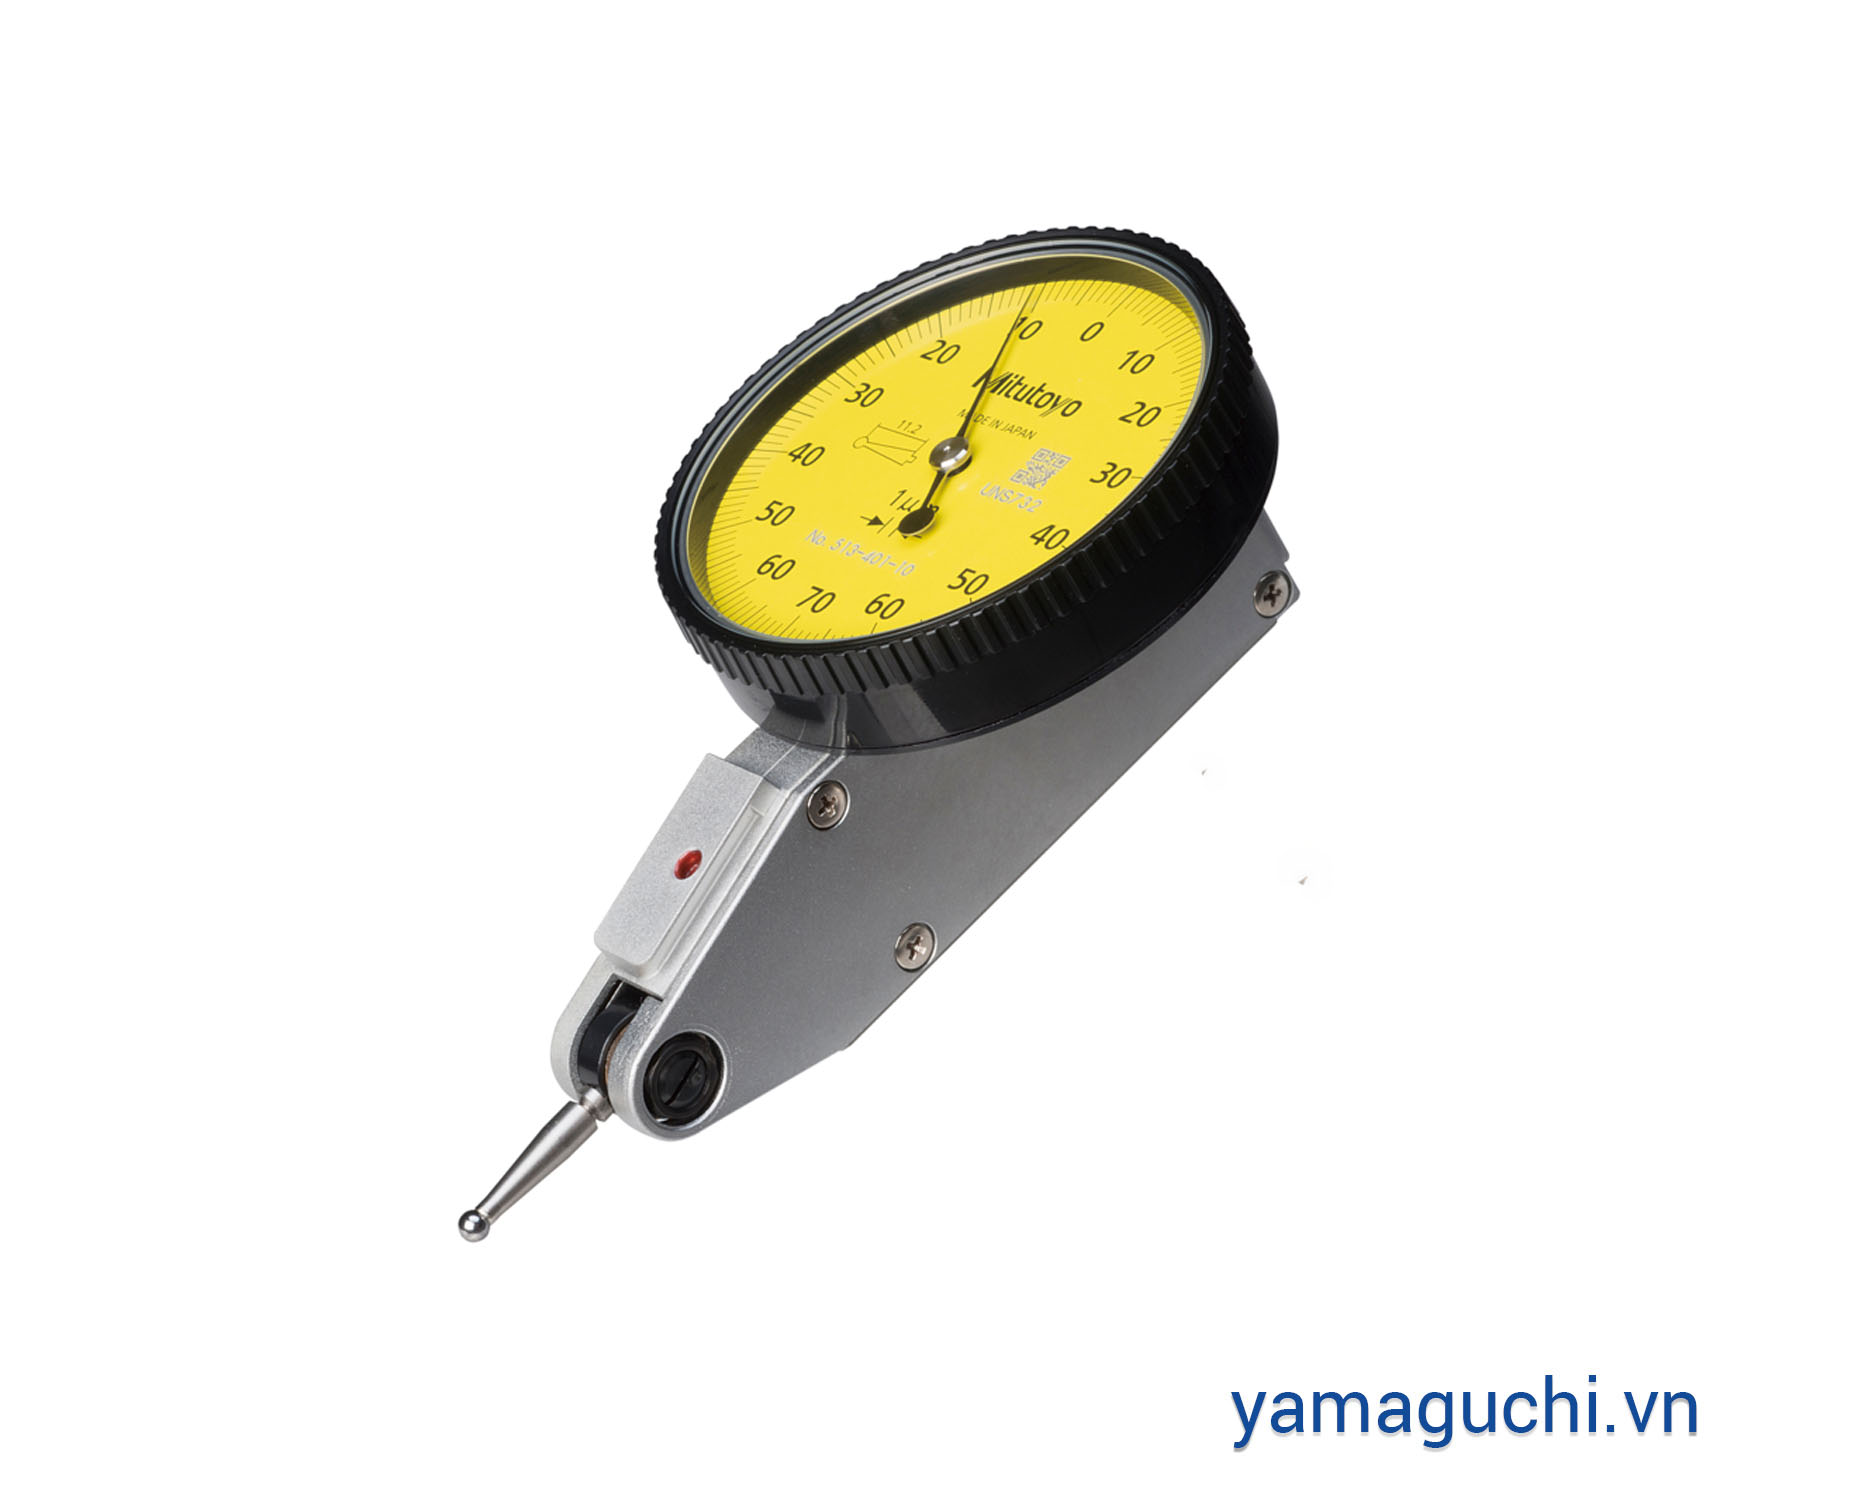 Mitutoyo 0-1mm/0.01 dial indicator (513-415-10E)